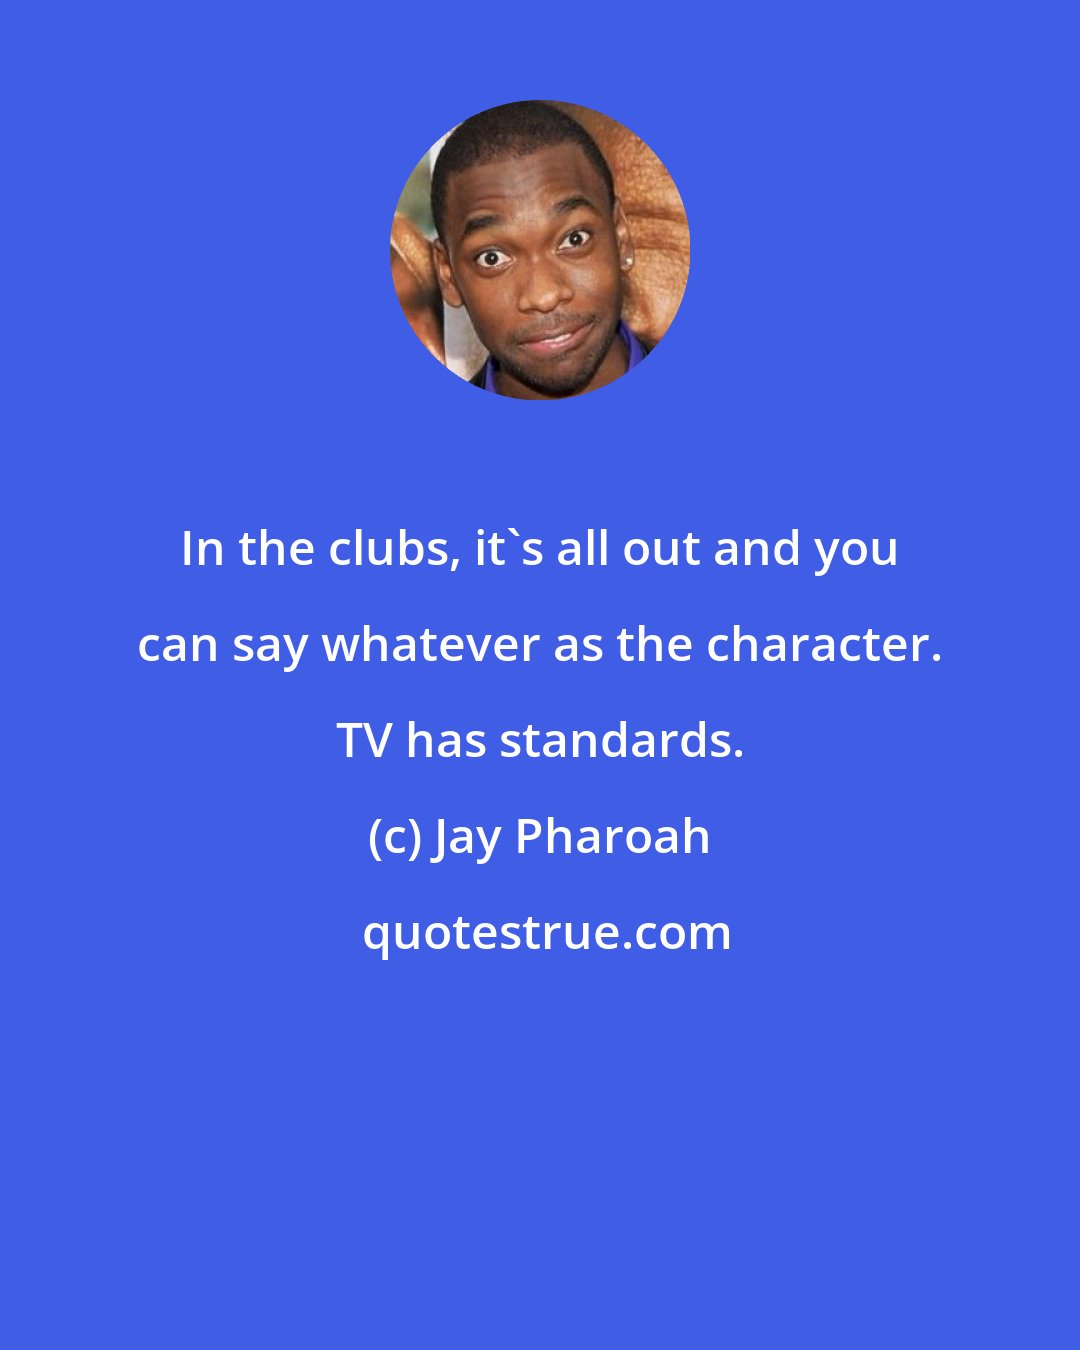 Jay Pharoah: In the clubs, it's all out and you can say whatever as the character. TV has standards.